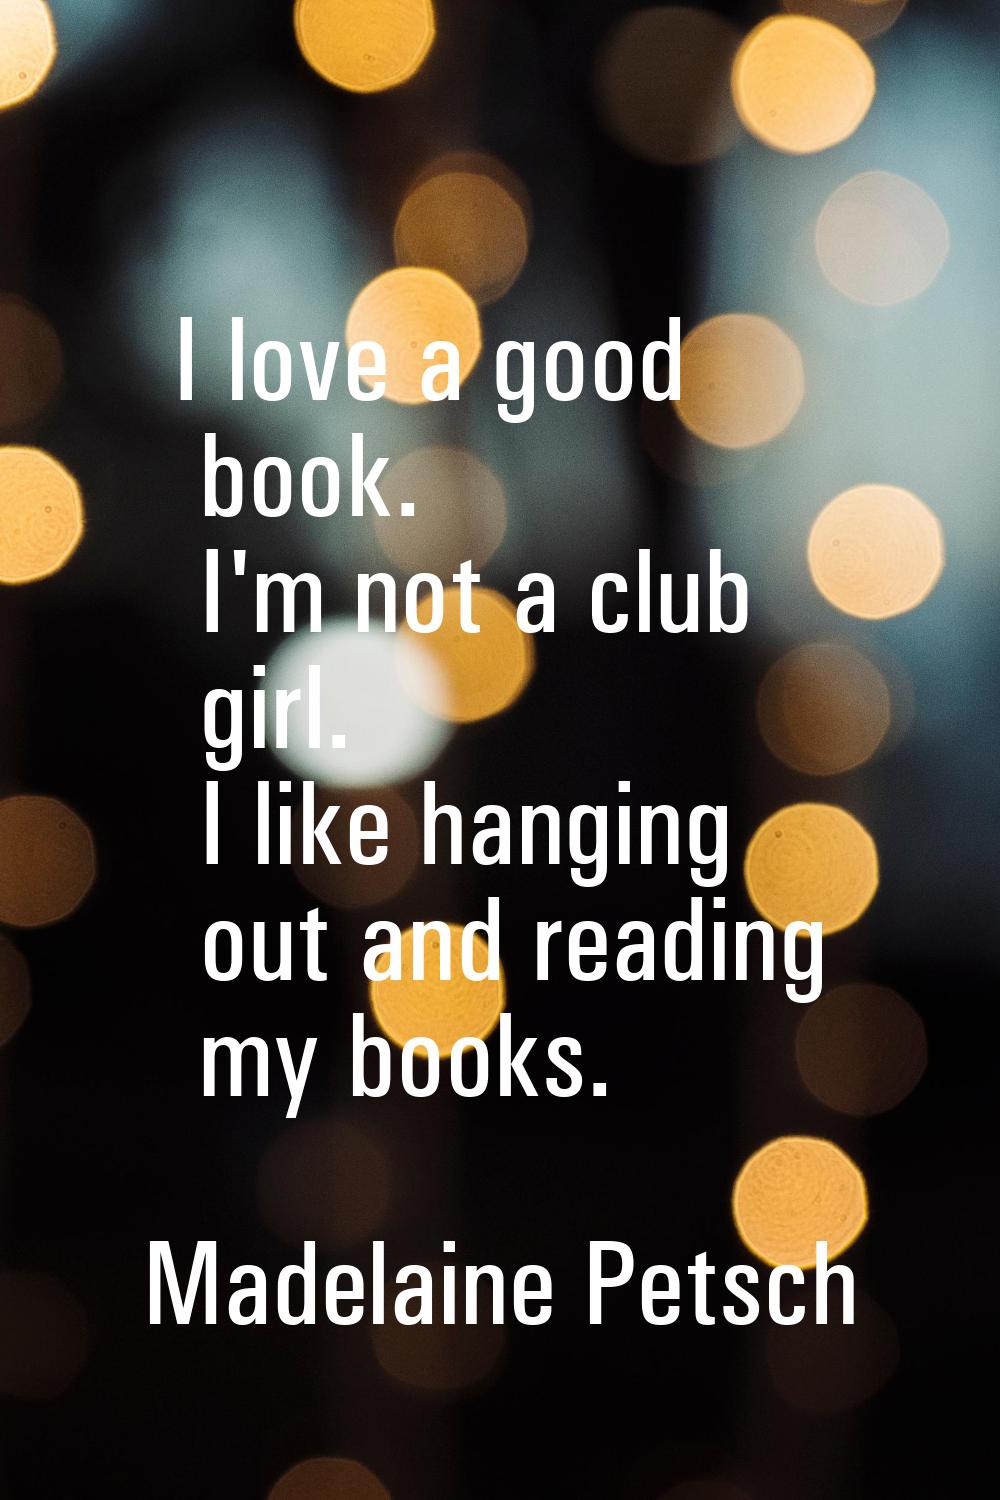 I love a good book. I'm not a club girl. I like hanging out and reading my books.